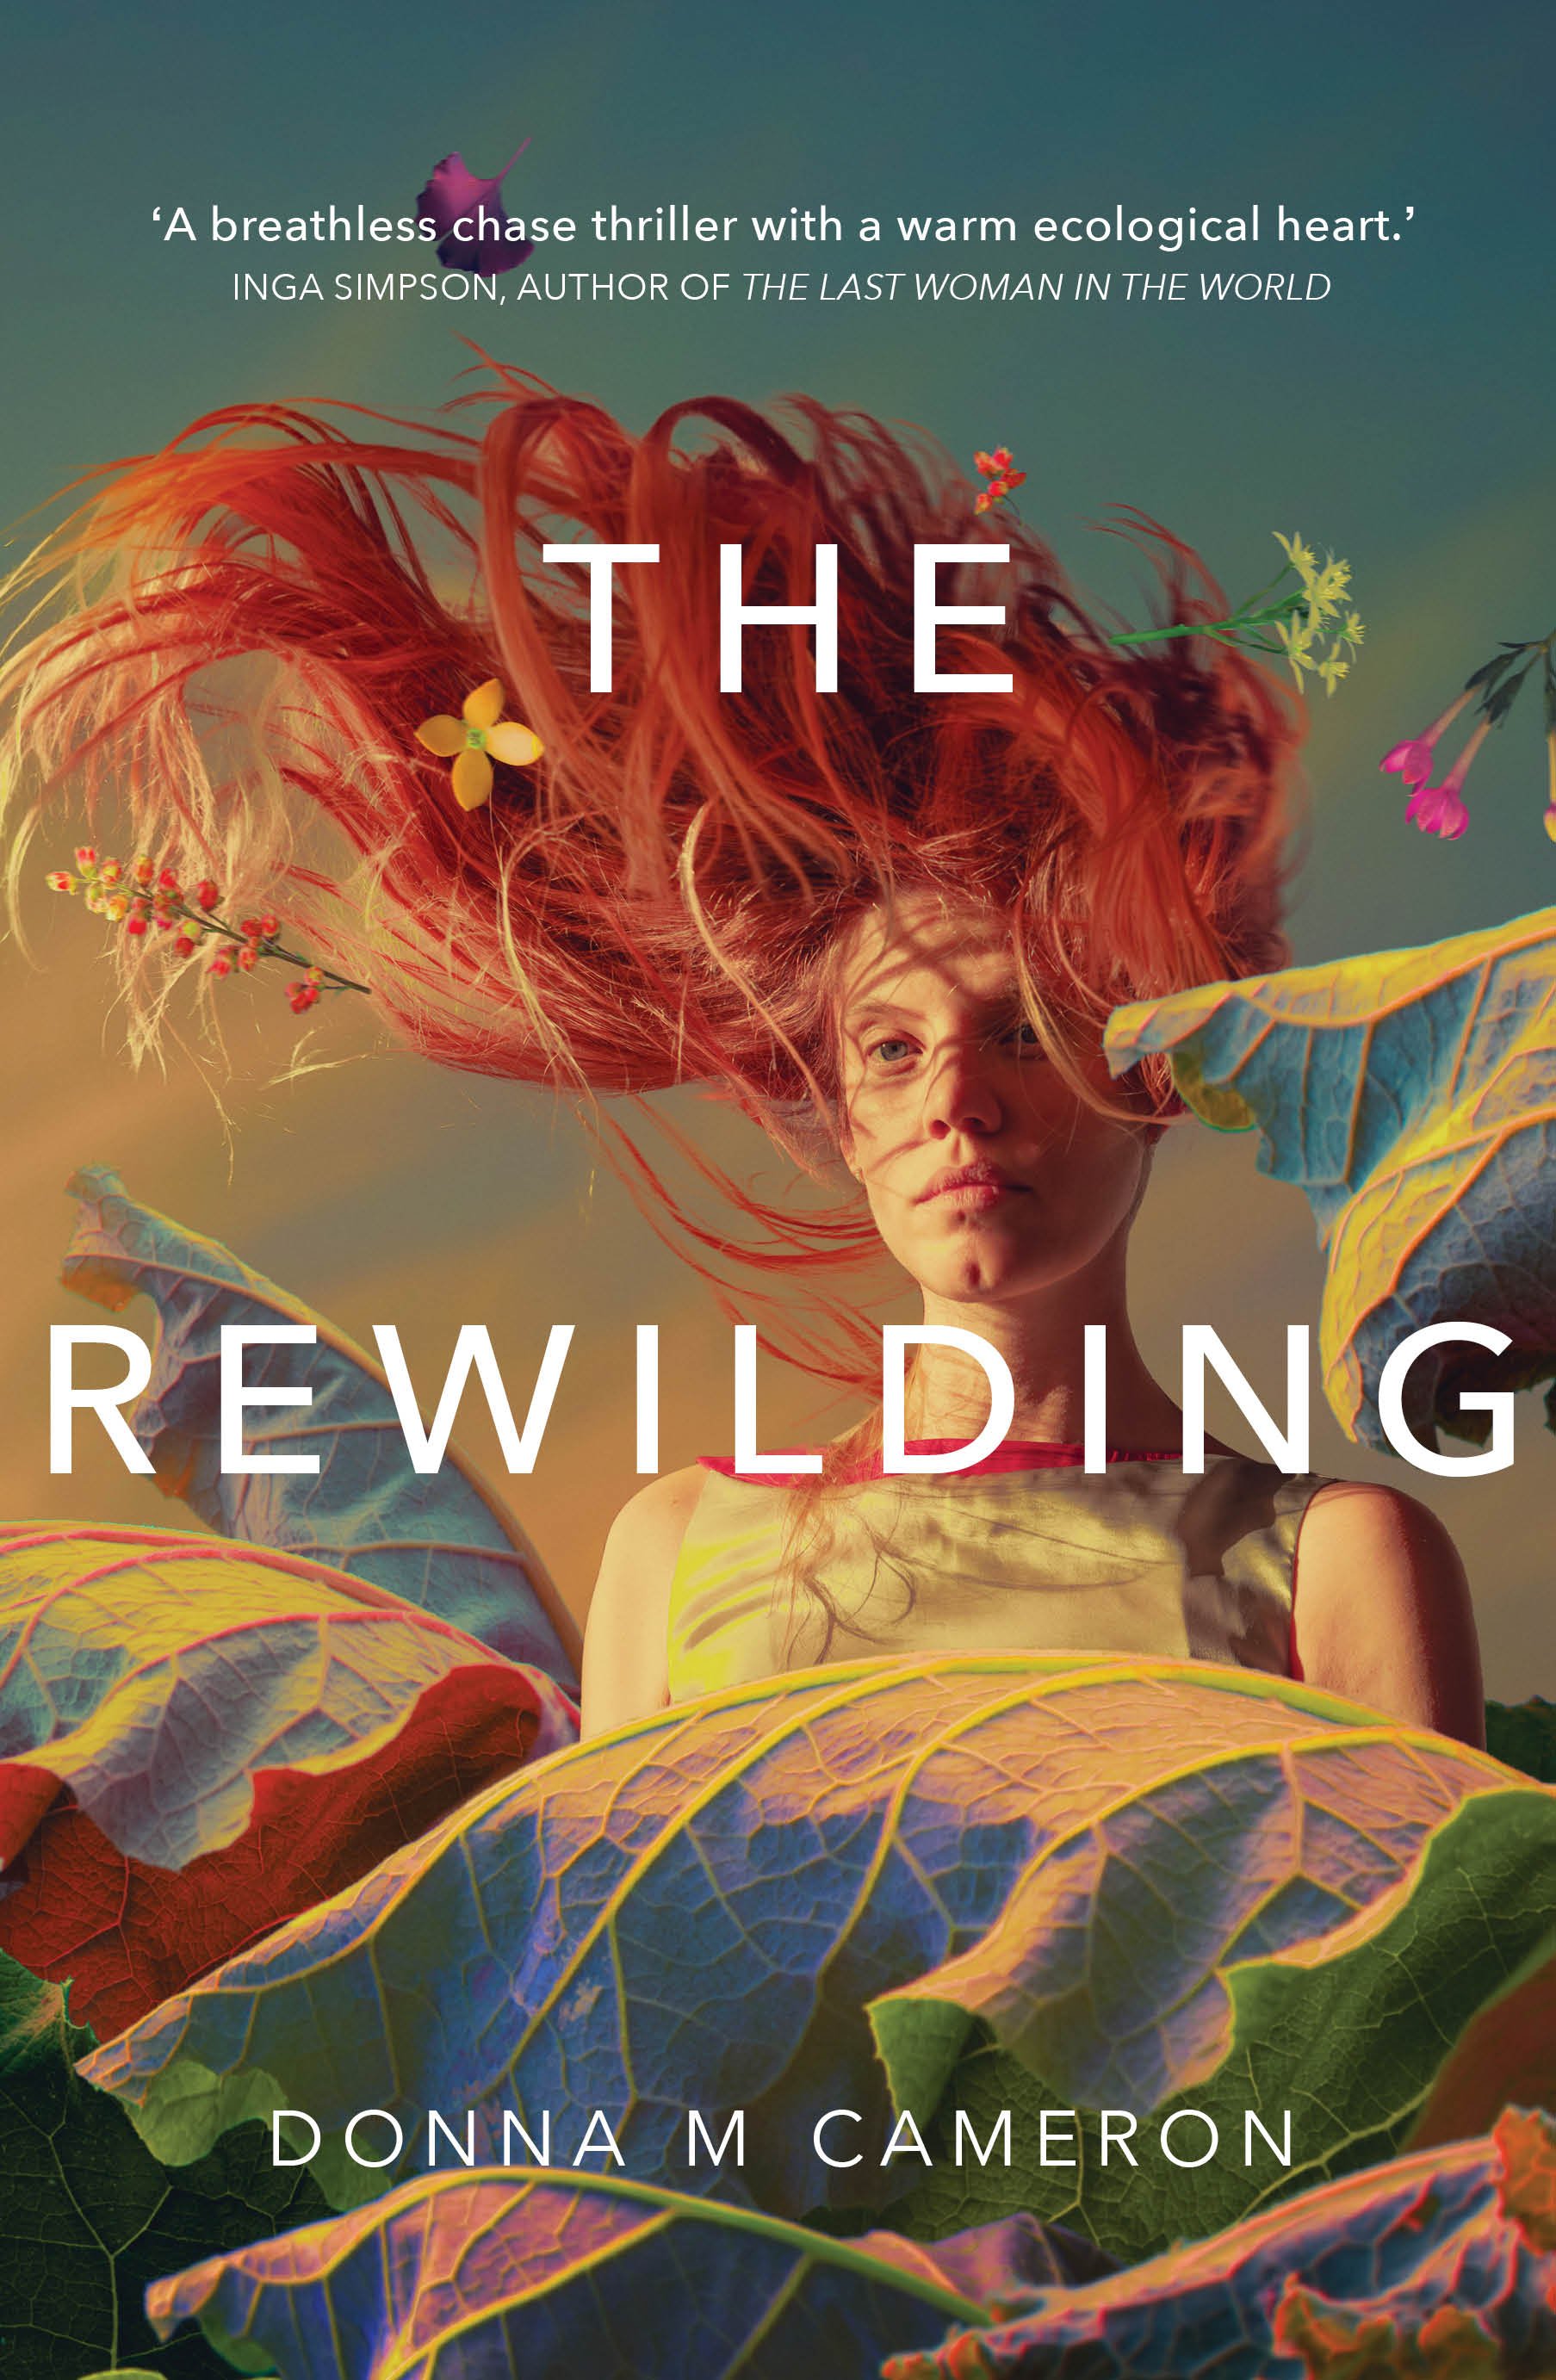 The Rewilding by Donna M Cameron